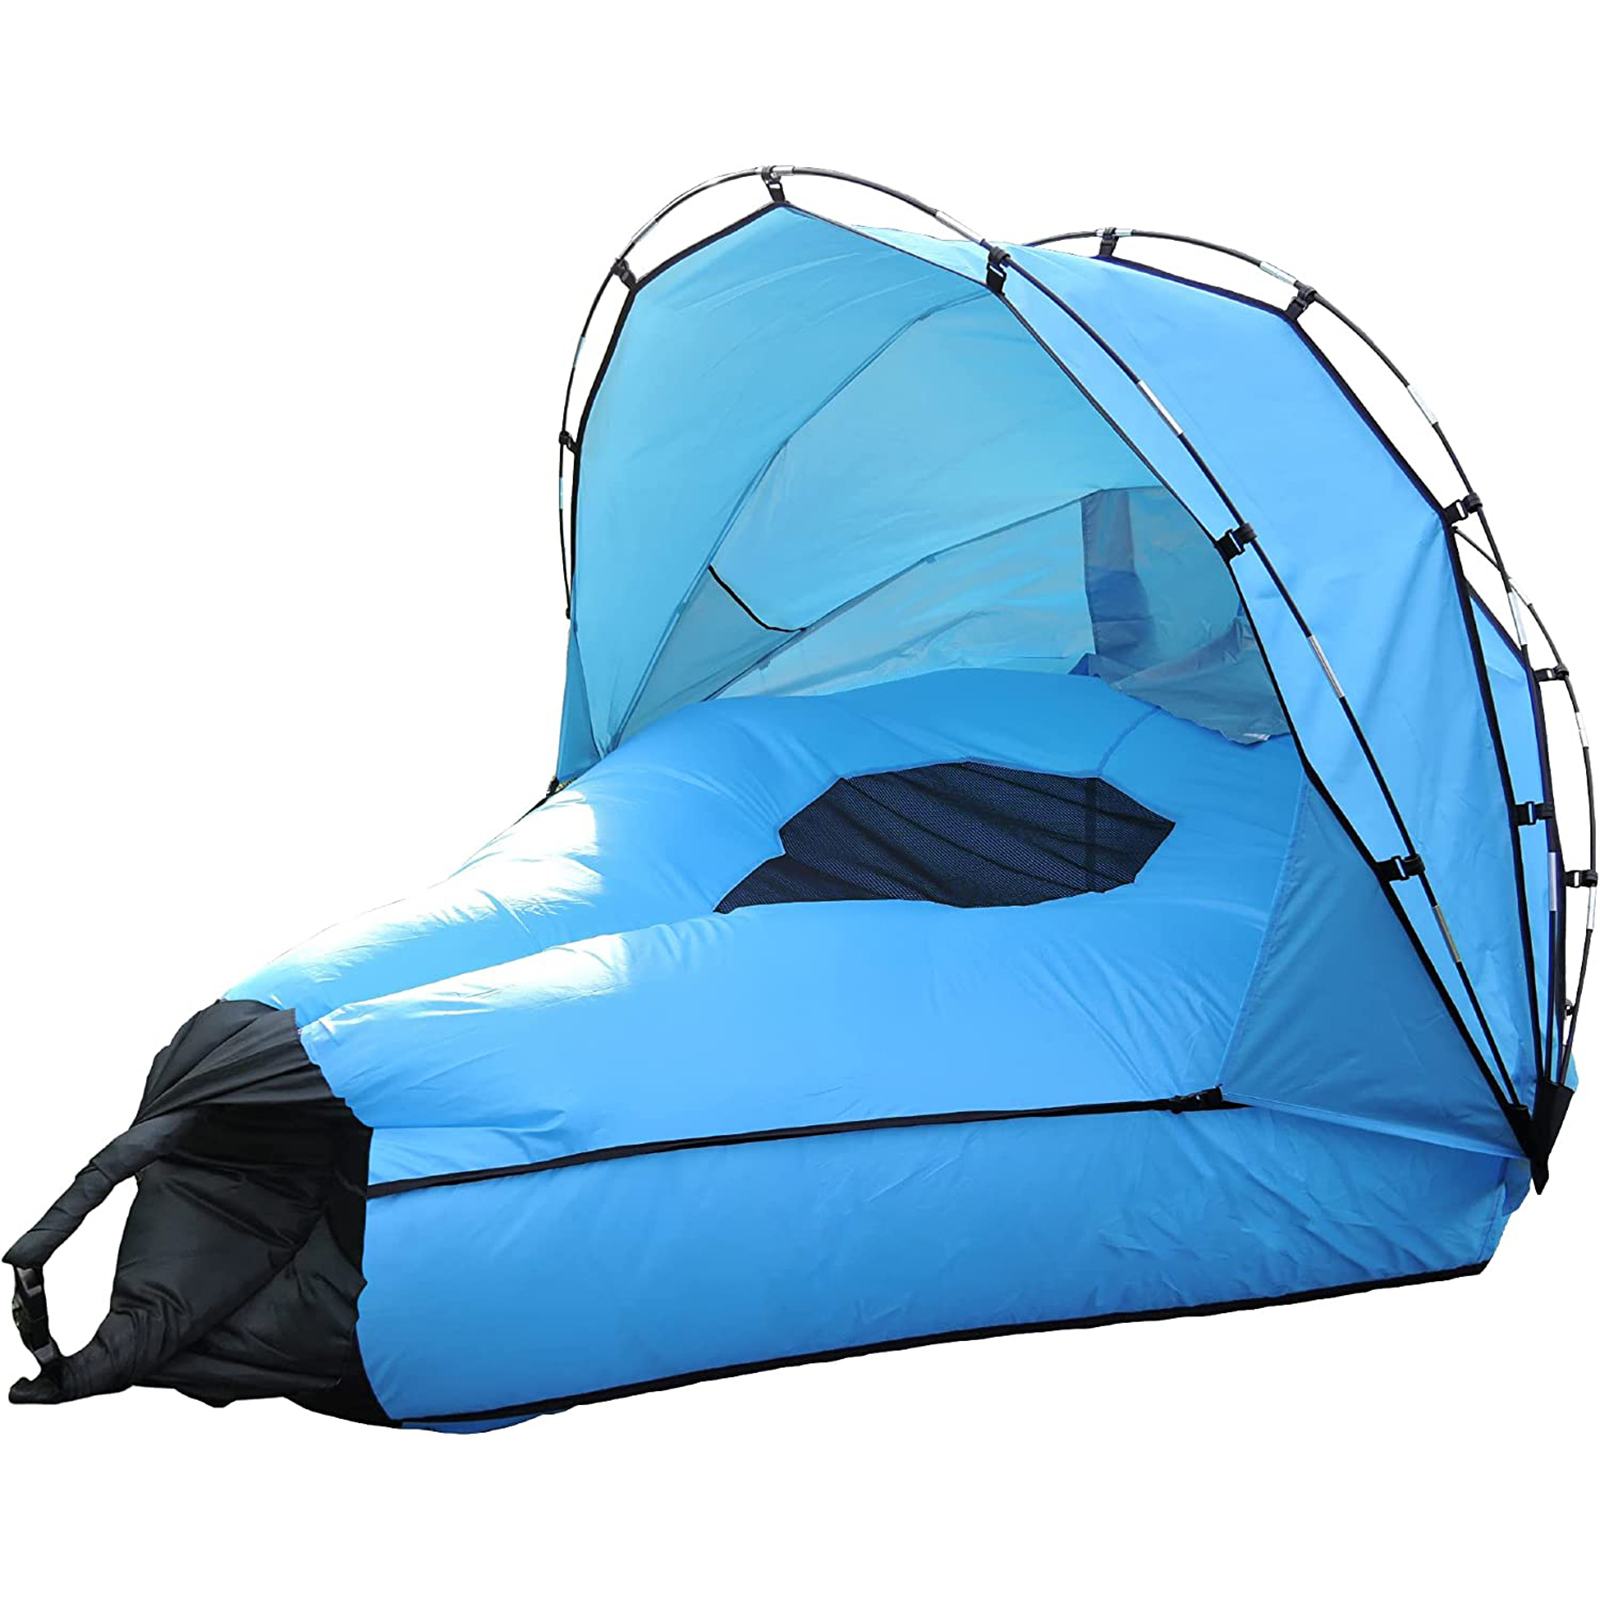 2 Person Inflatable Lounger Air Couch, Portable,Water Proof& Anti-Air Leaking Air Sofa with Canopy for Camping, Hiking, Beach,Travelling, Outdoor Cencerts Camping Compression Sacks